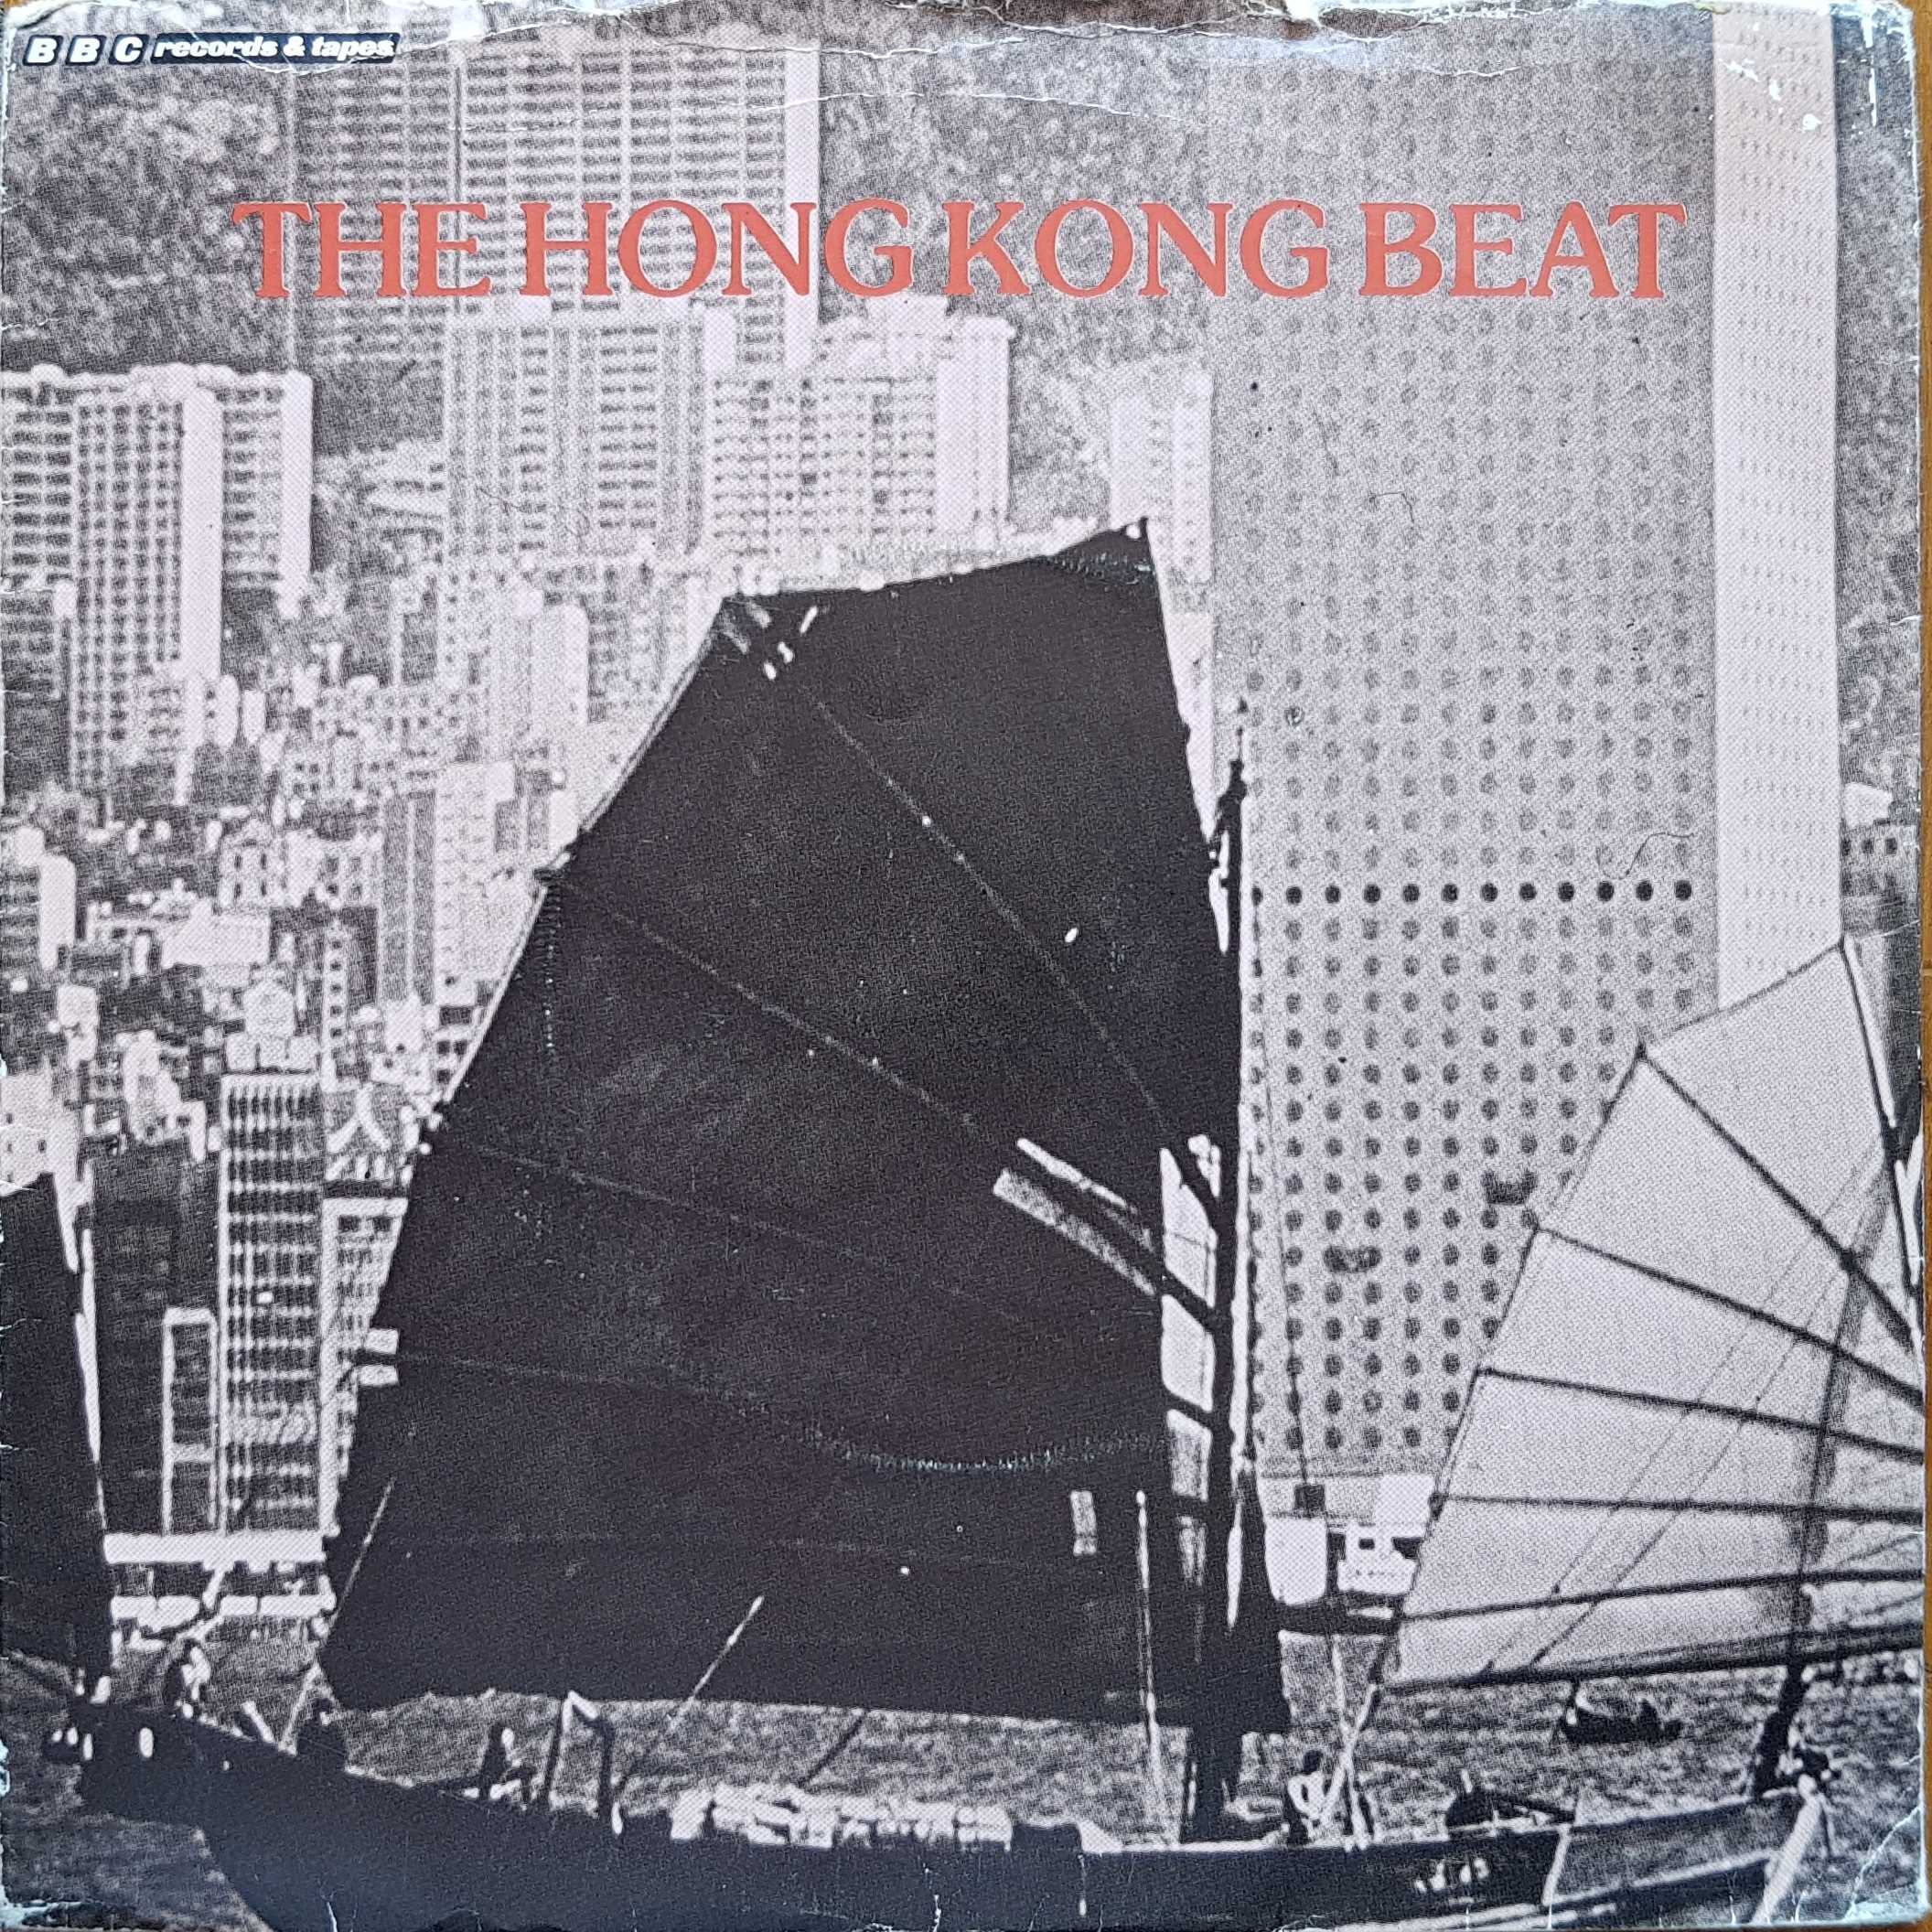 Picture of RESL 52 The Hong Kong beat by artist Richard Denton / Martin Cook from the BBC singles - Records and Tapes library